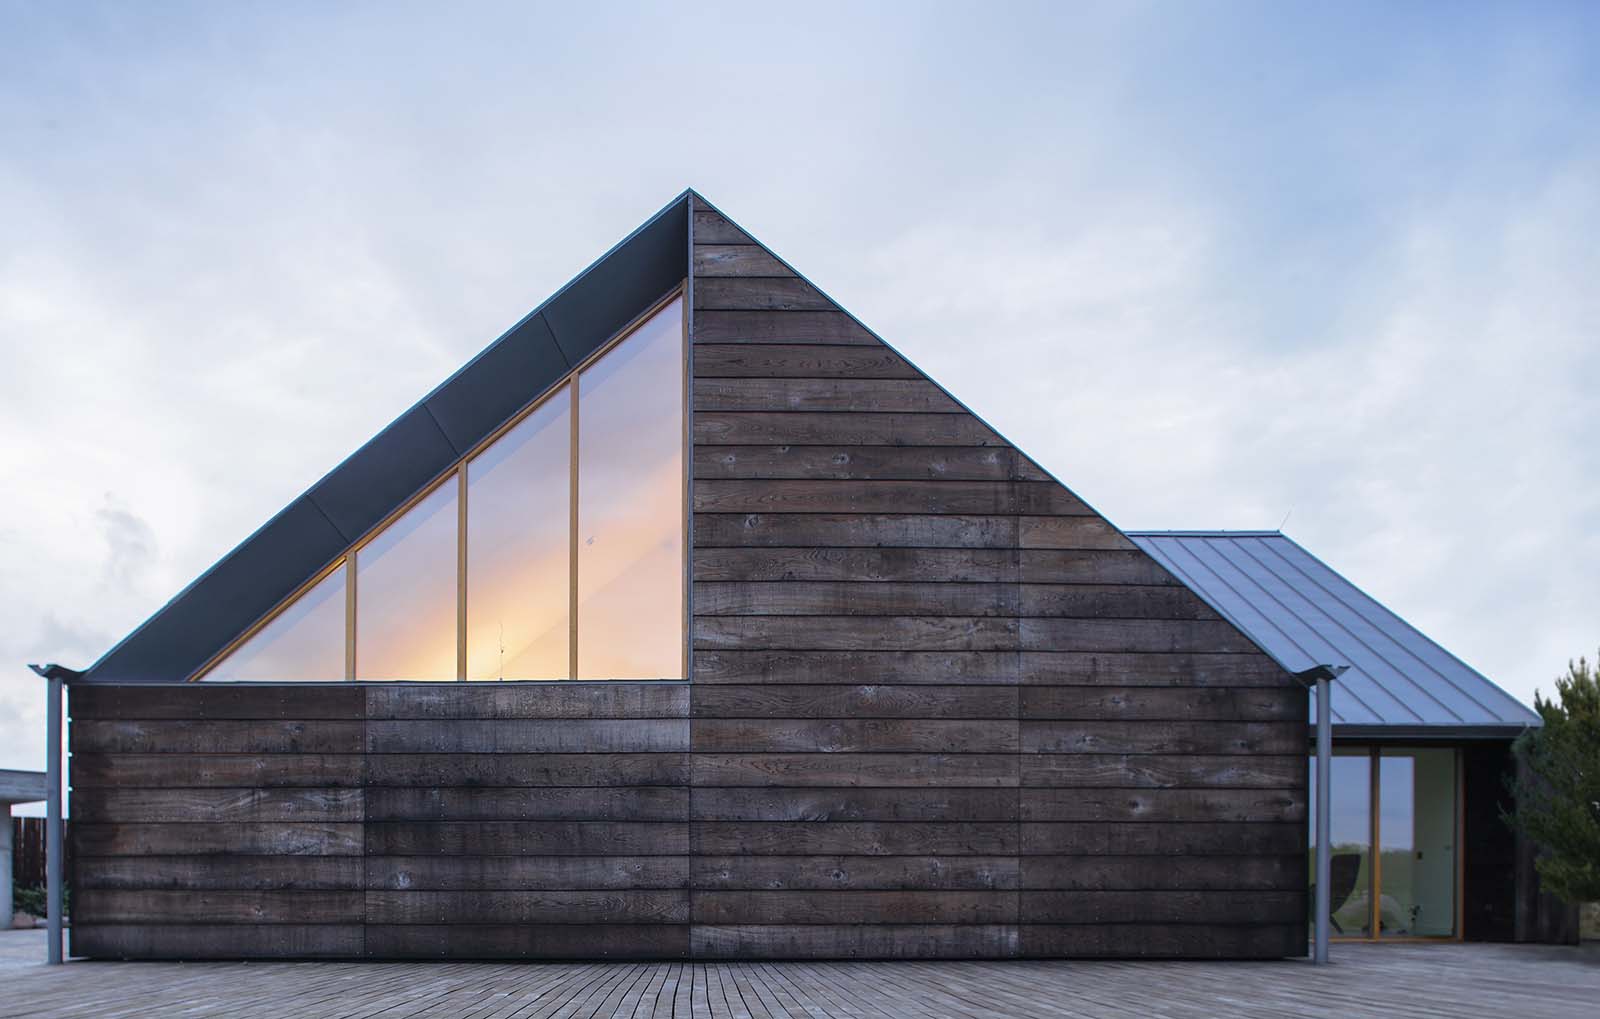 Archisearch Implant Architecture designed a star shaped house in Radailiai, Lithuania